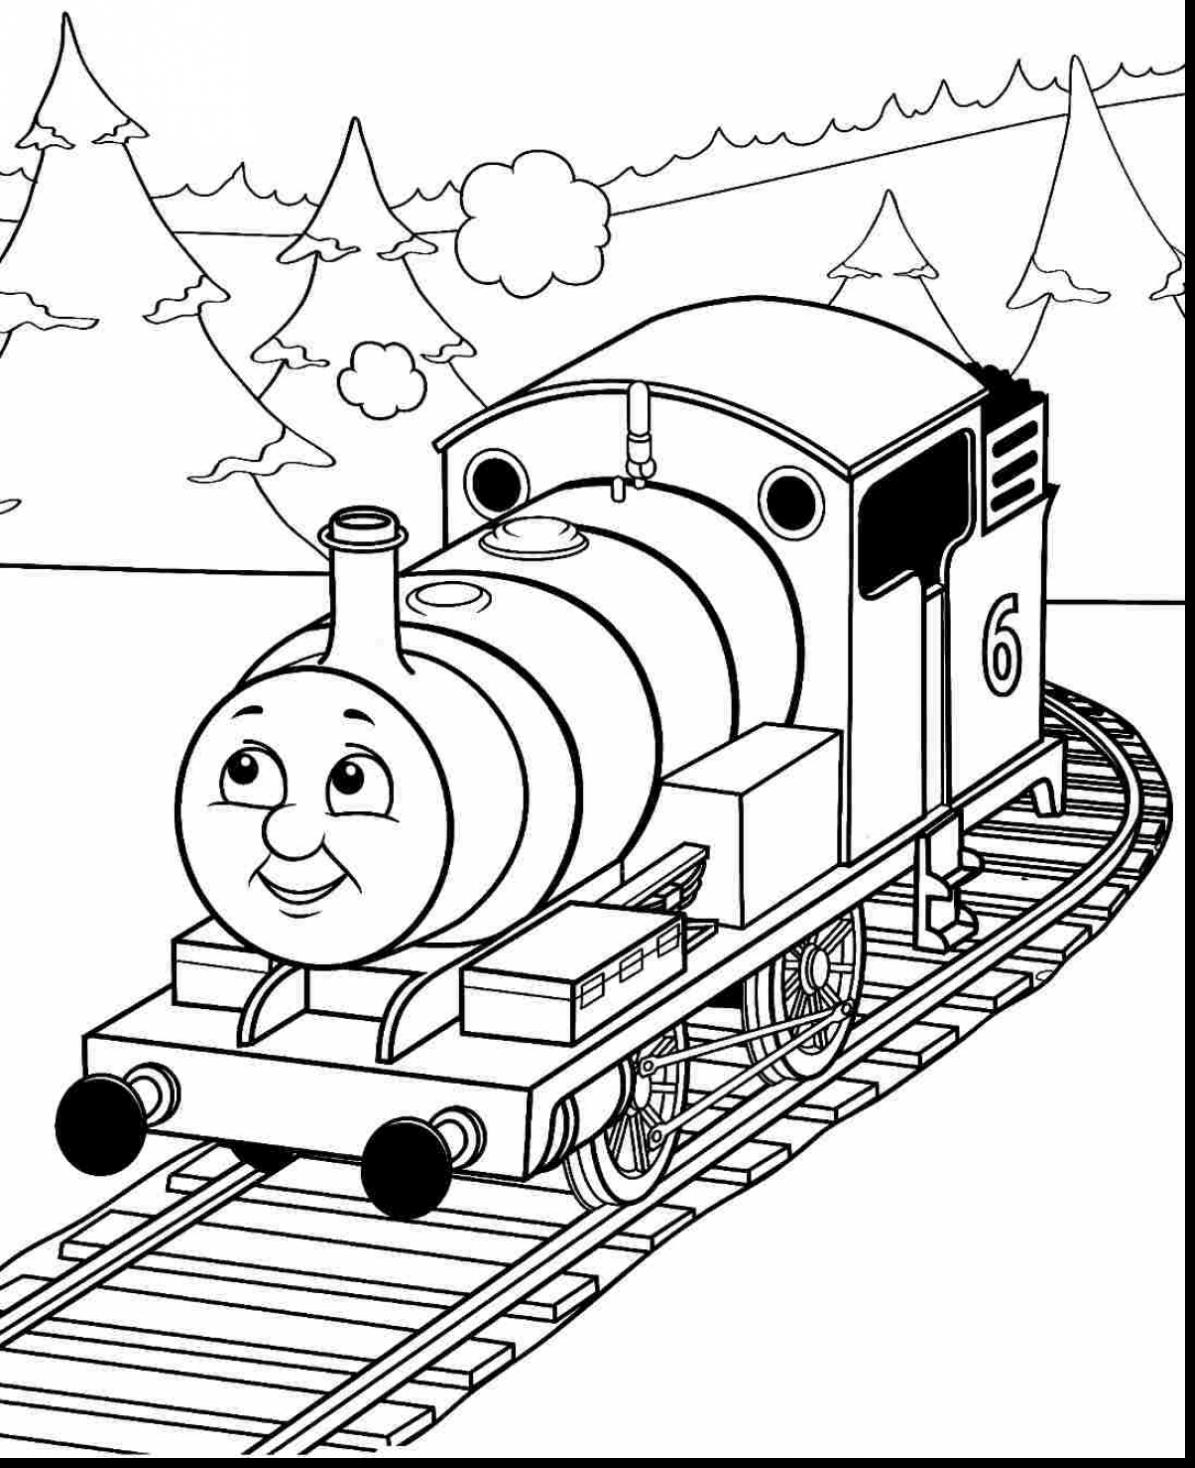 Thomas Coloring Pages Printable Coloring Ideas Engine Coloring Pages Ideas Thomas The Withew And